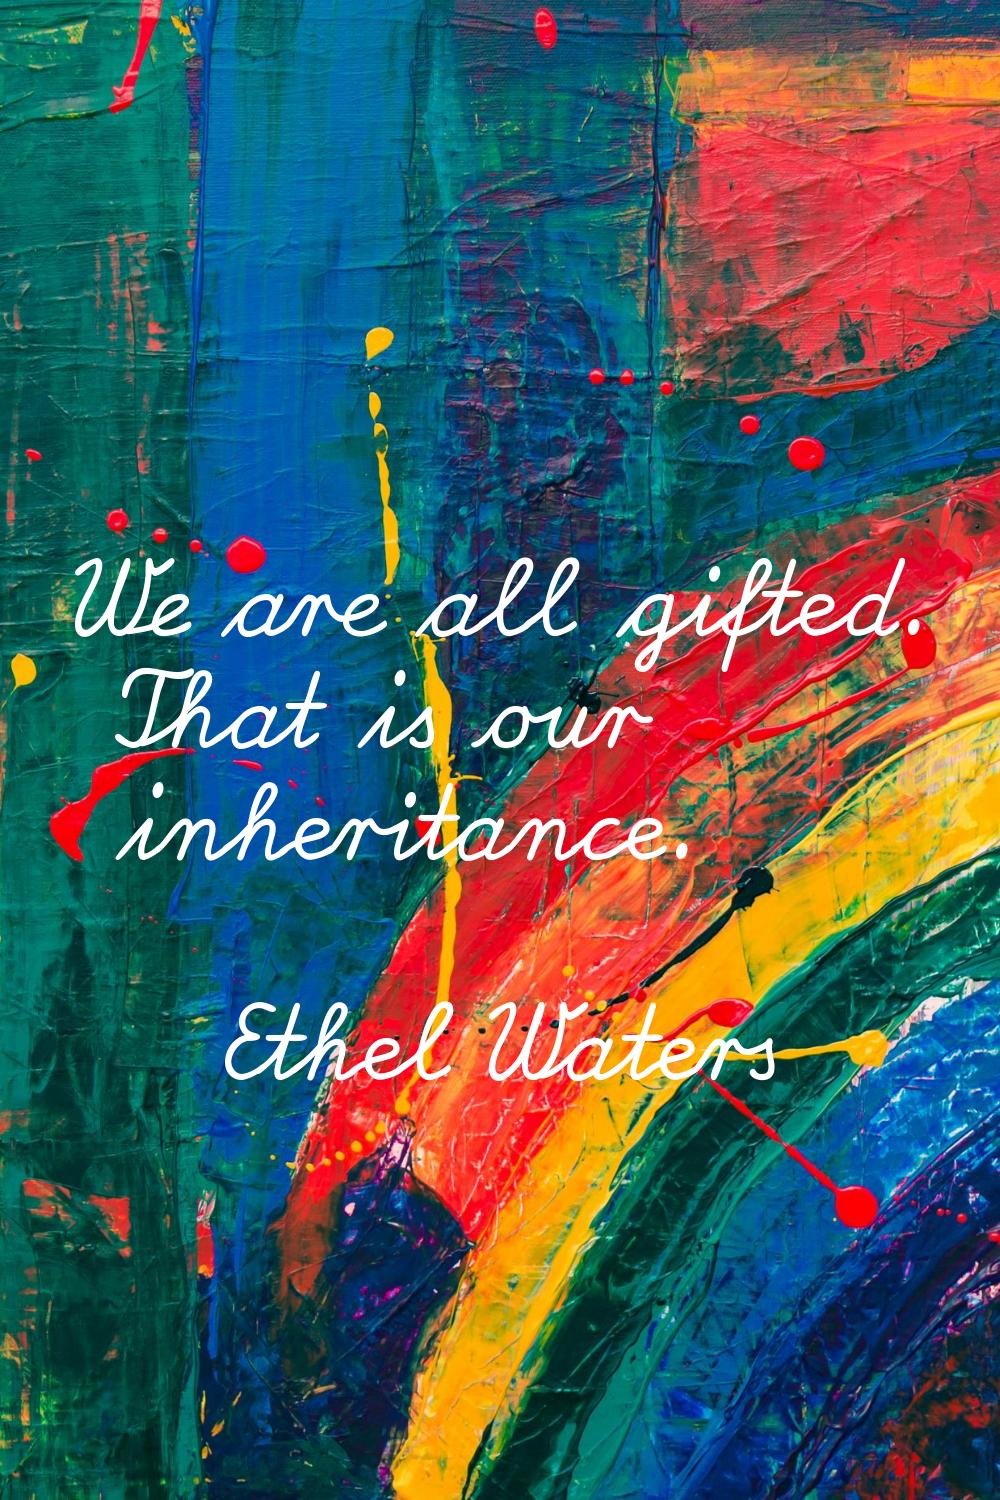 We are all gifted. That is our inheritance.